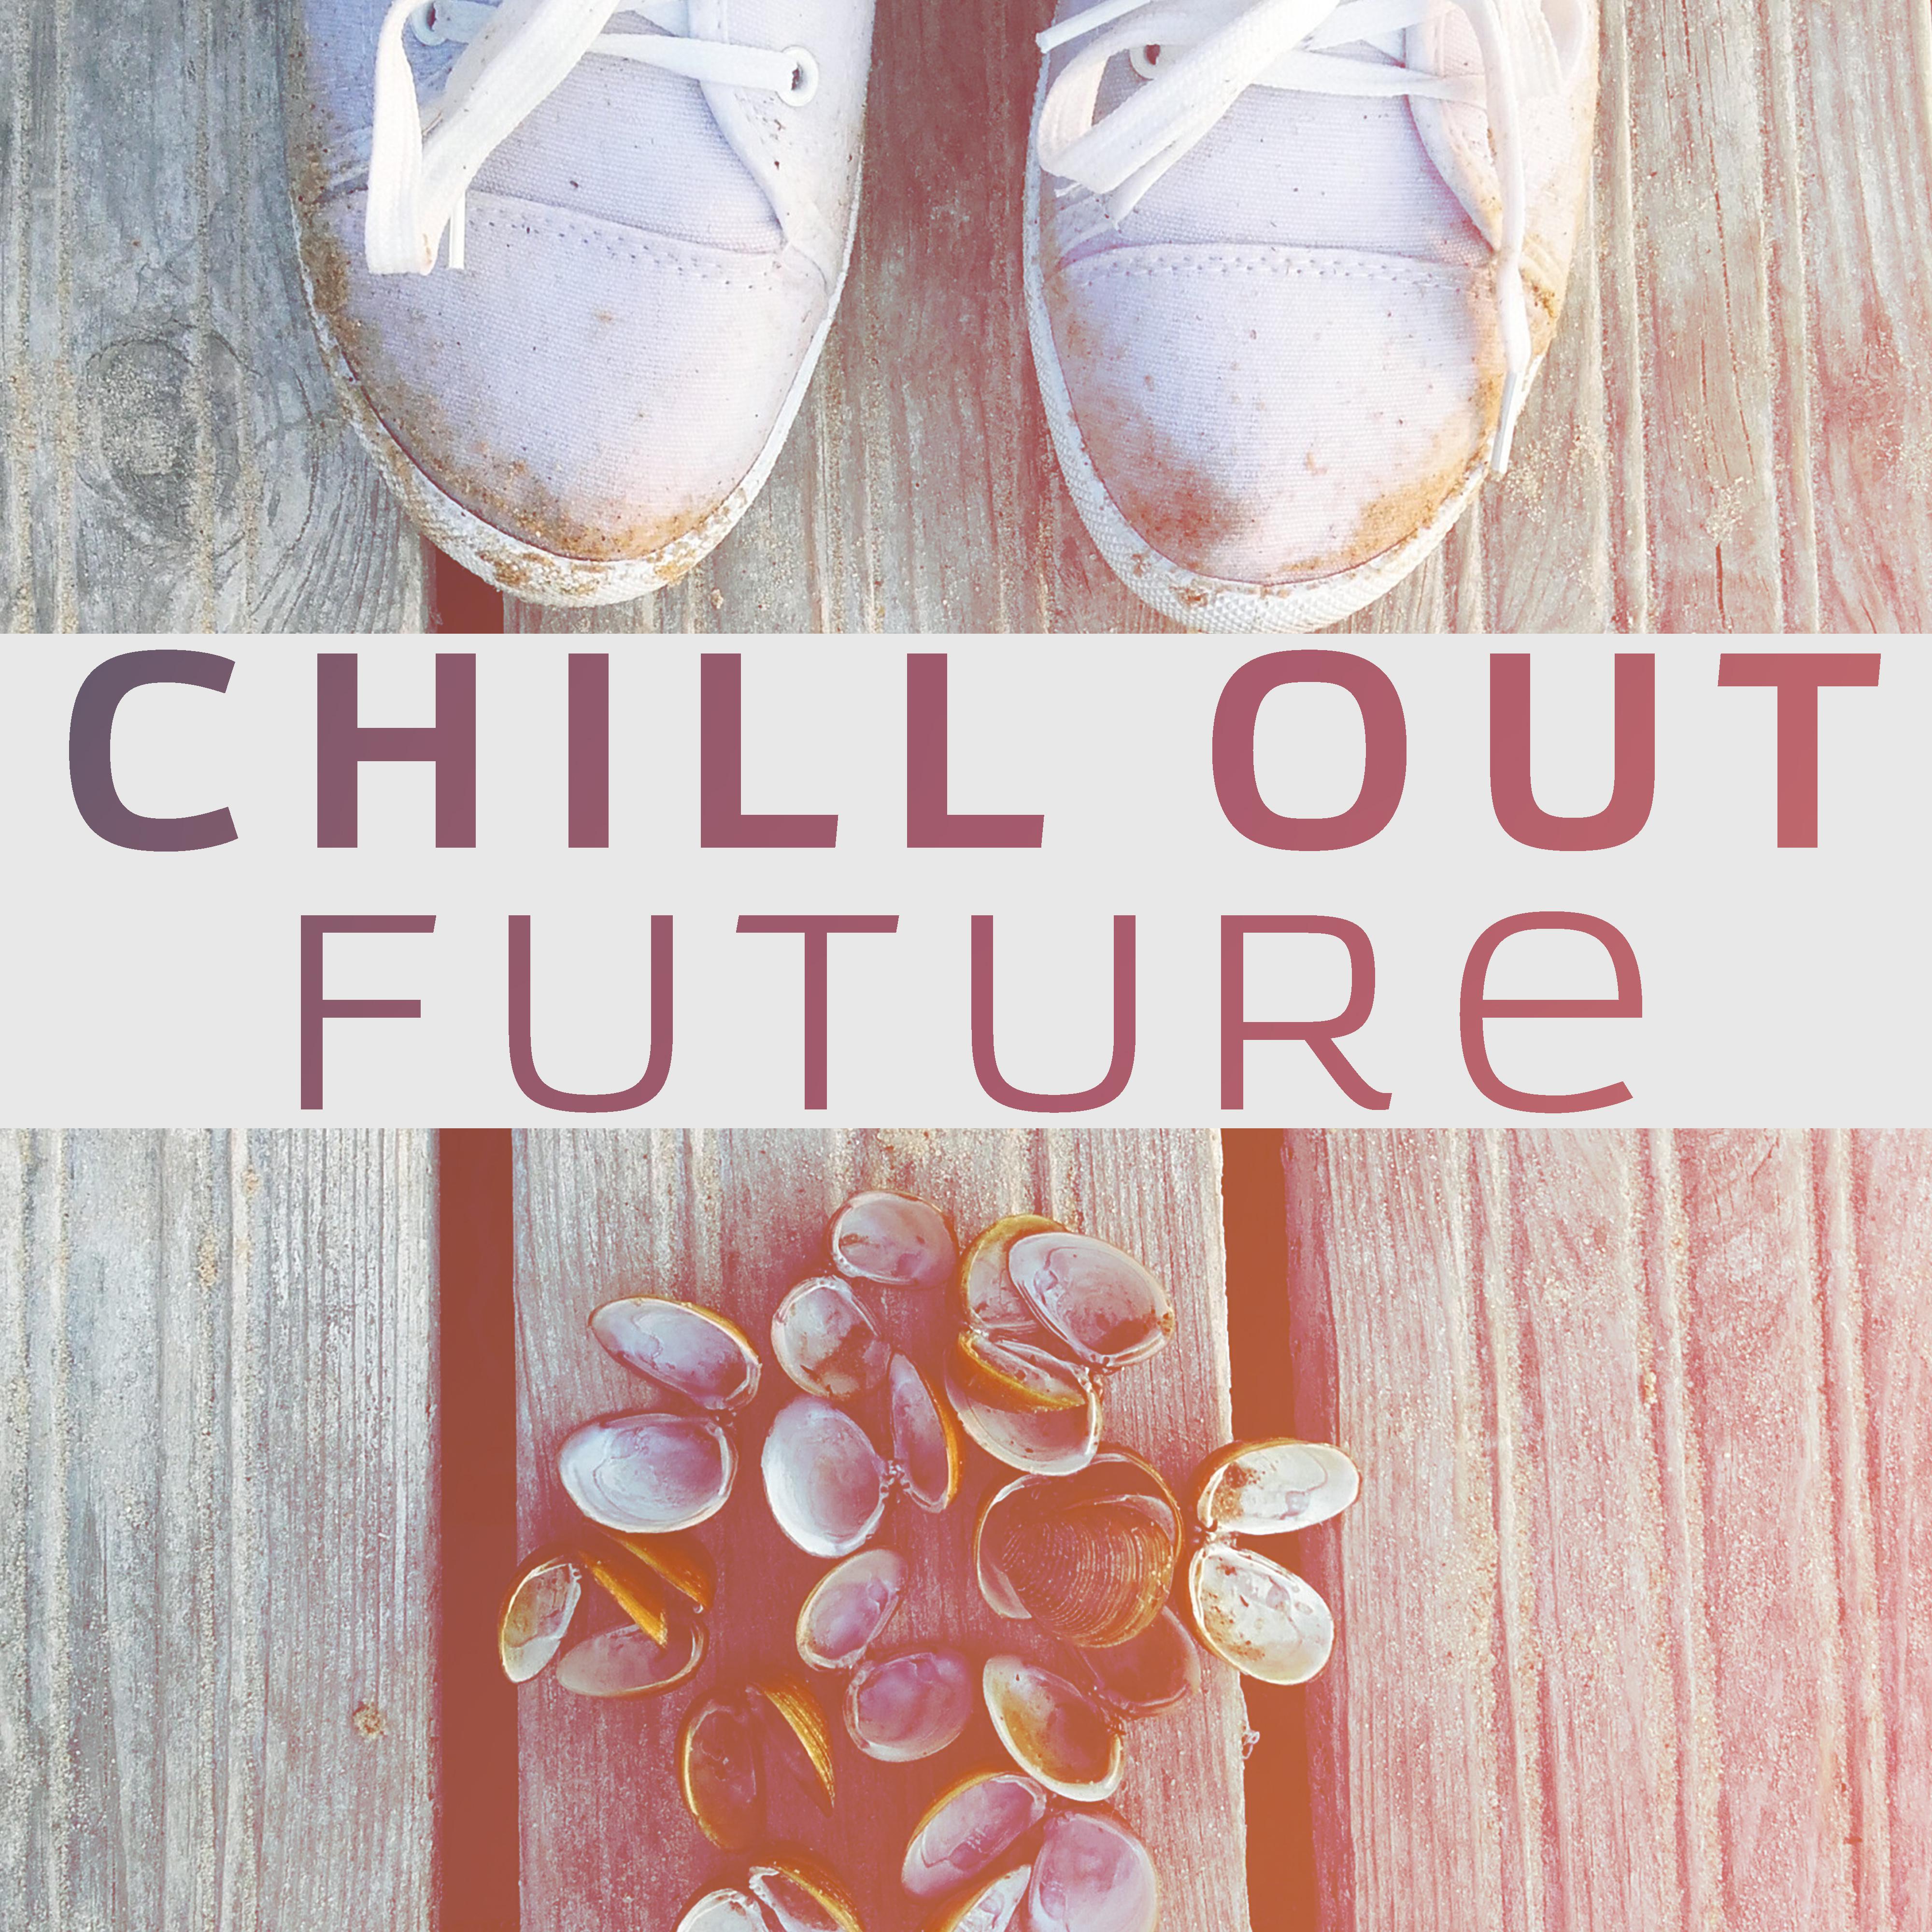 Chill Out Future – Electro Chill Out, Dance Music, Trance, Relax, Chill Out 2017, Lounge